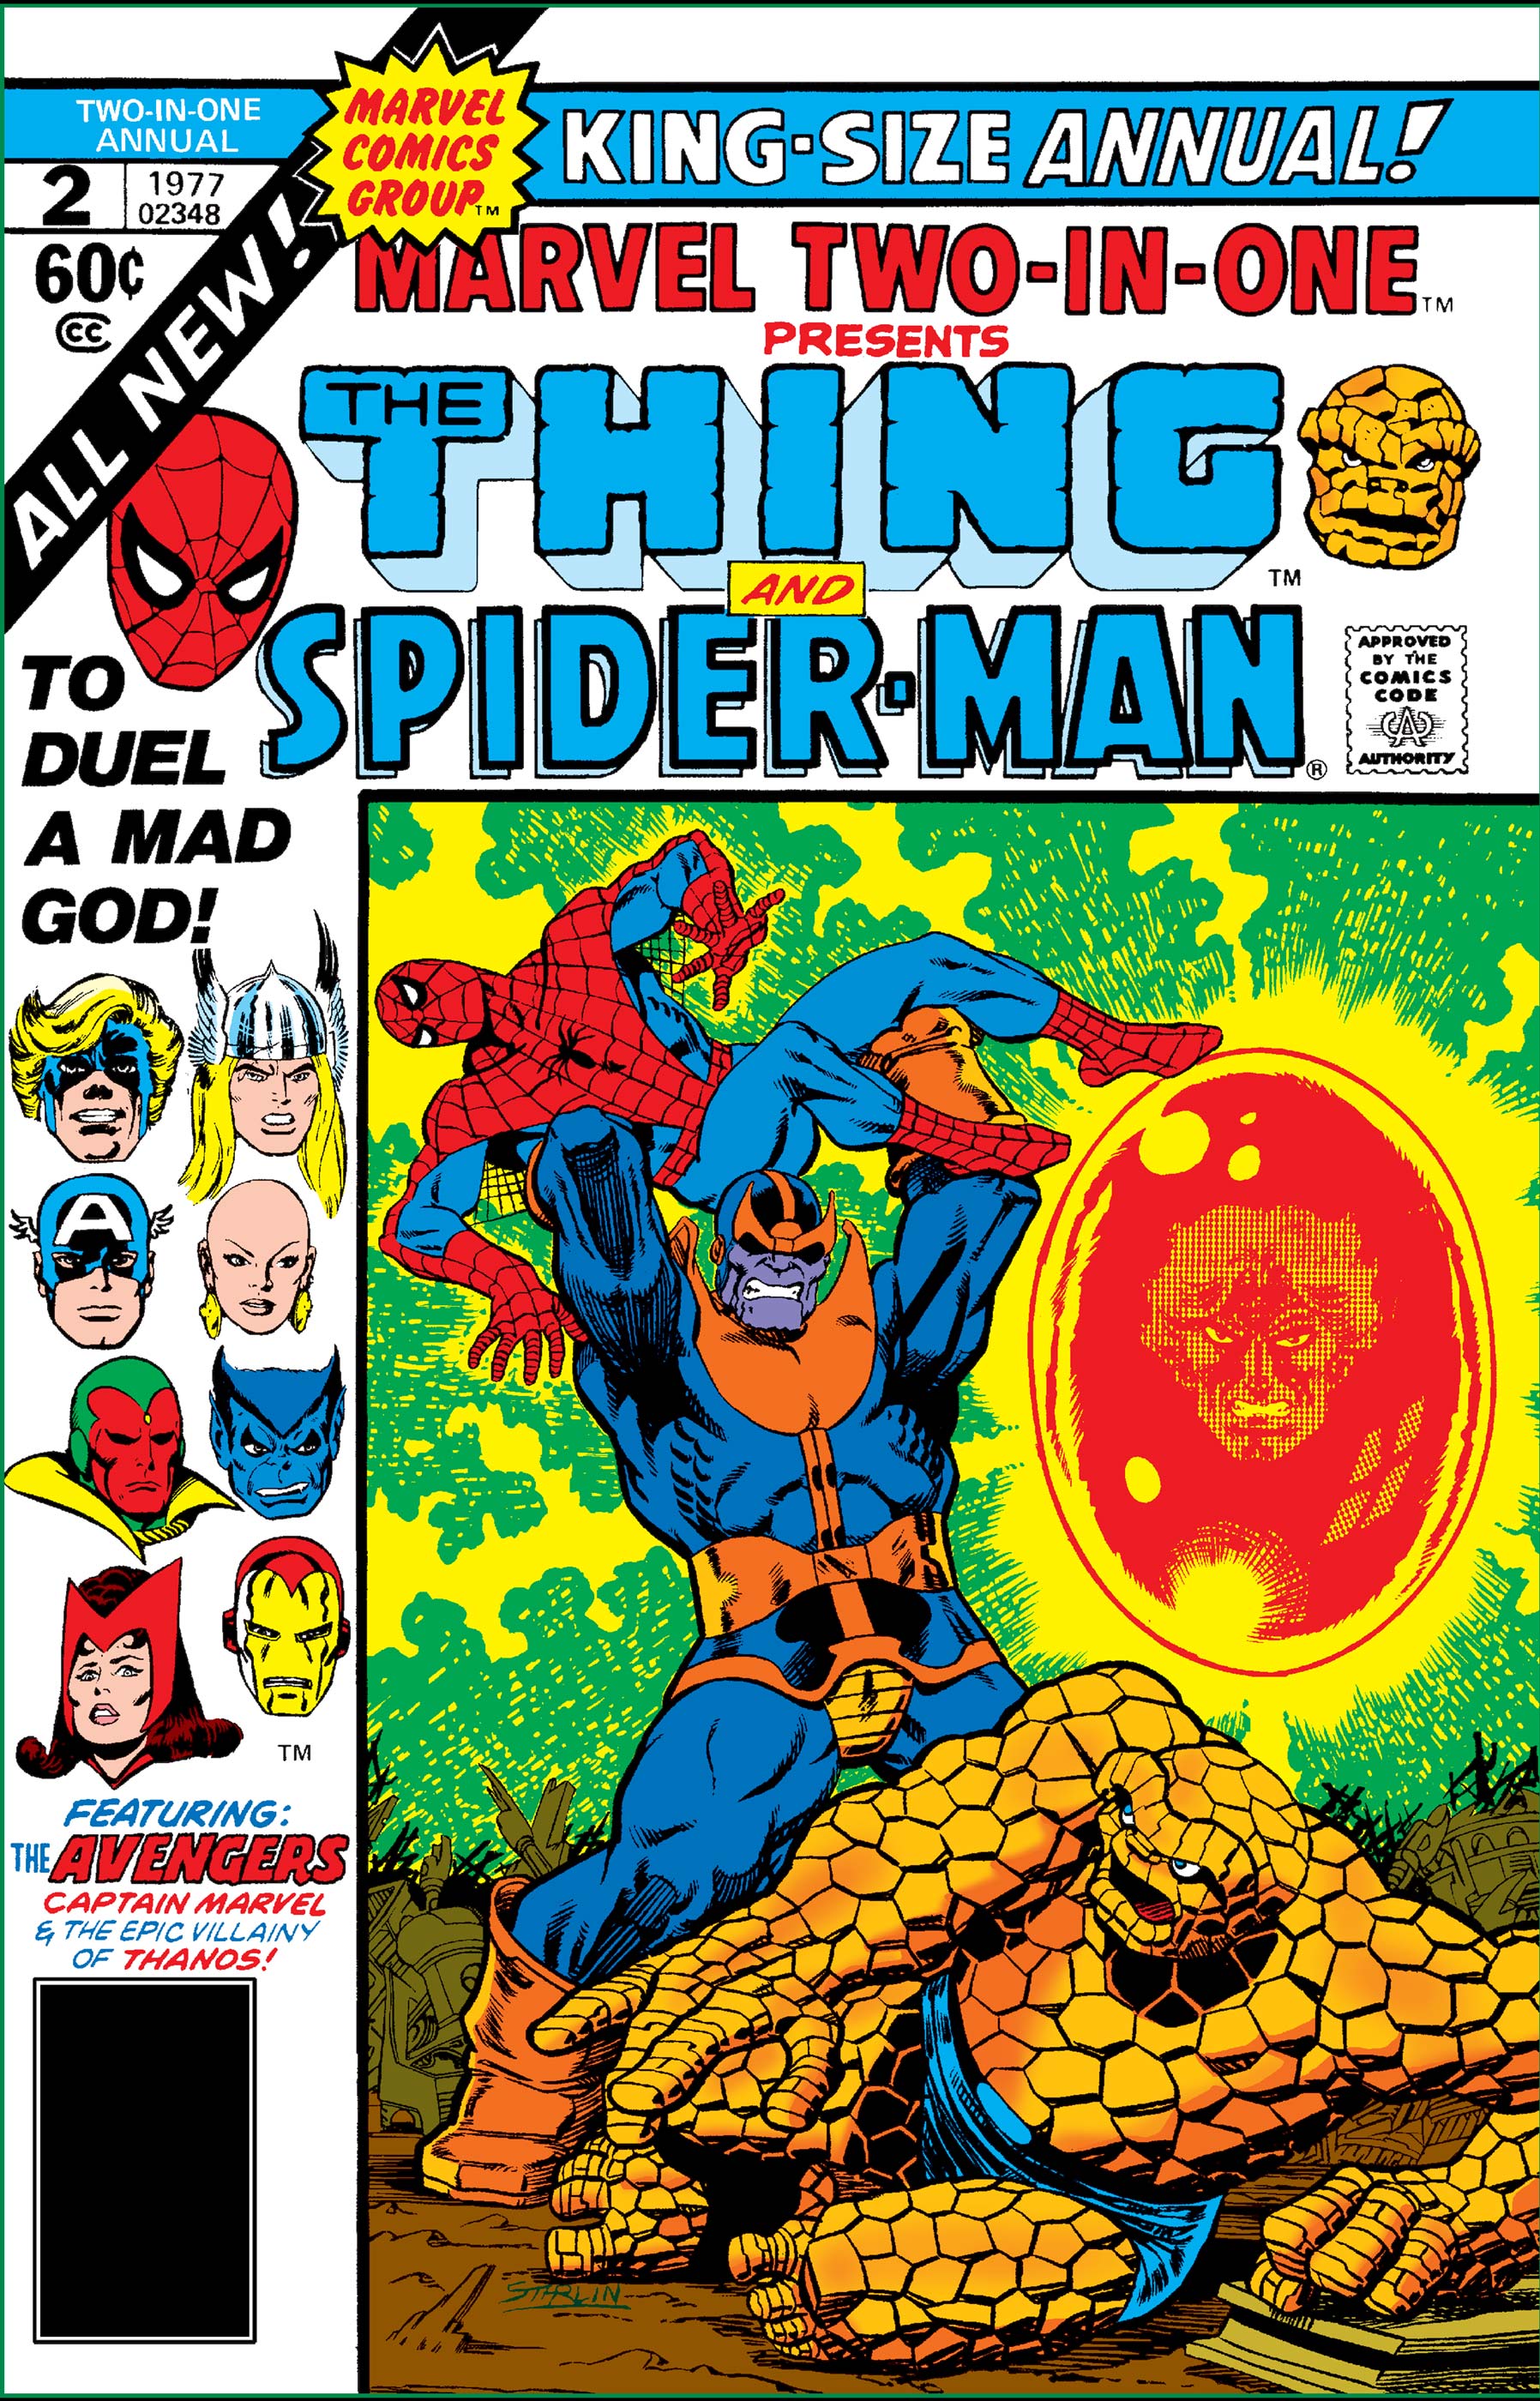 Marvel Two-in-One Annual (1976) #2